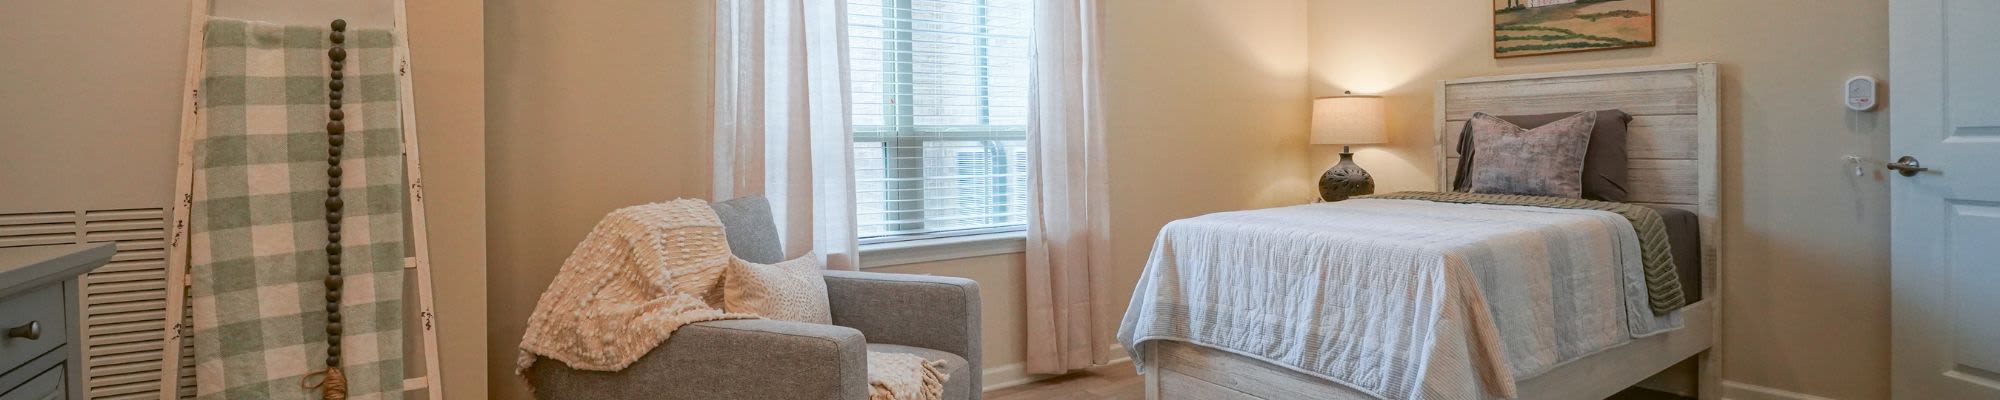 Memory Care at The Harmony Collection at Columbia in Columbia, South Carolina